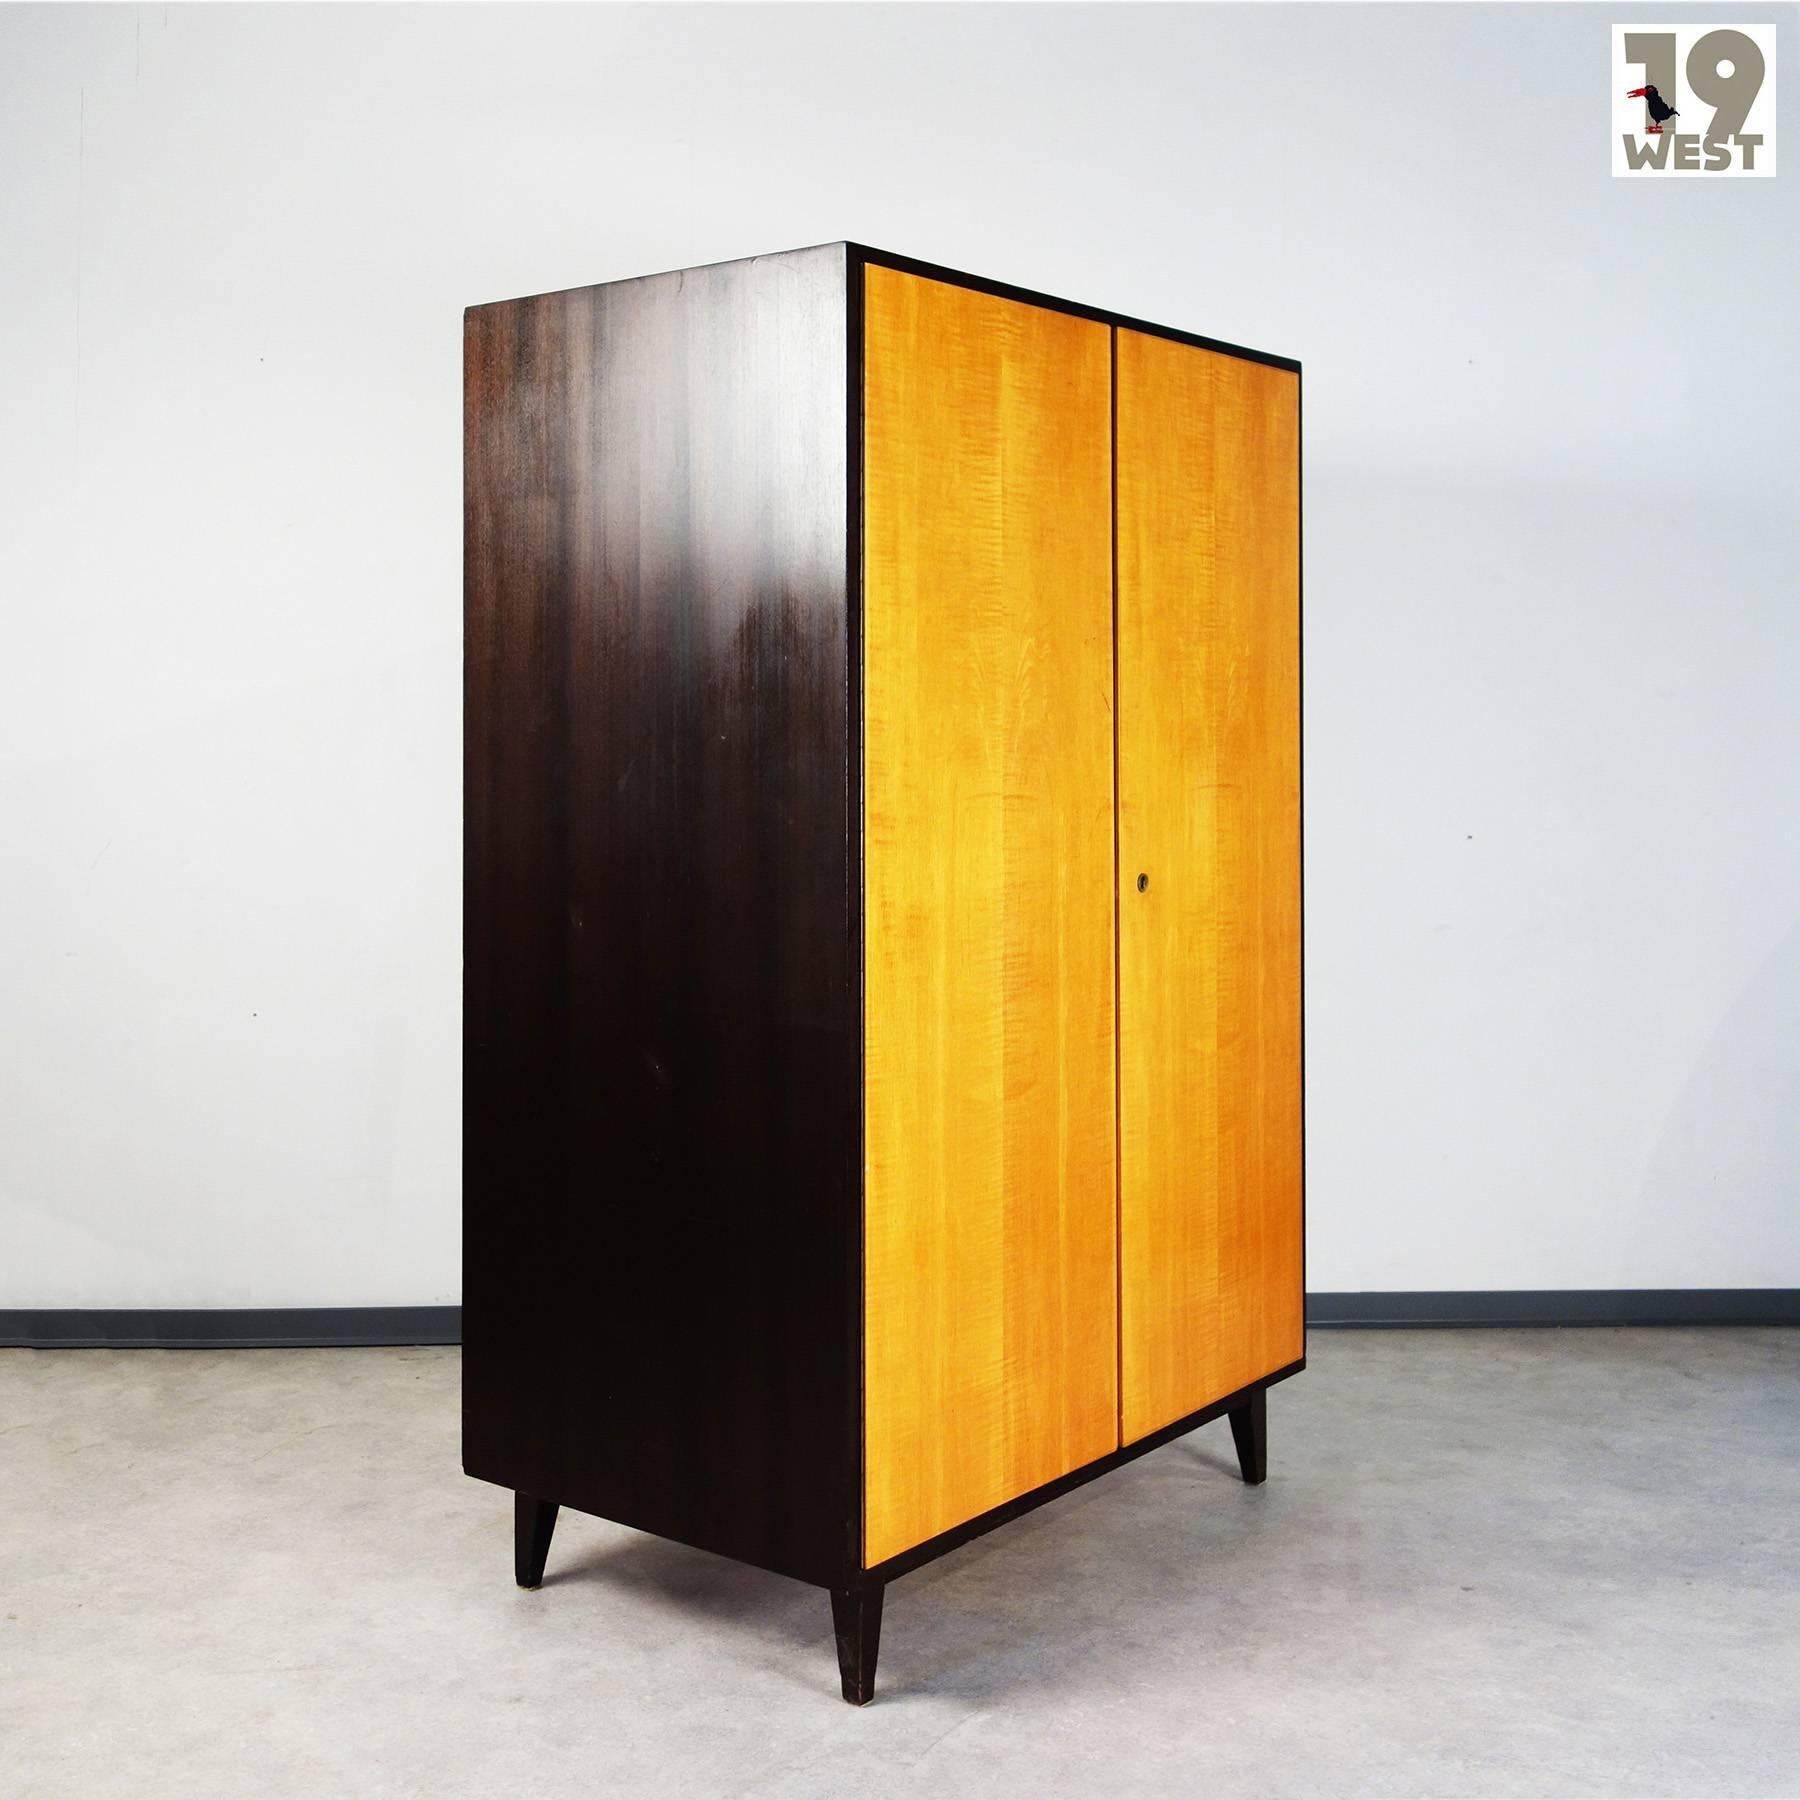 German Modernist Wardrobe from the 1950s